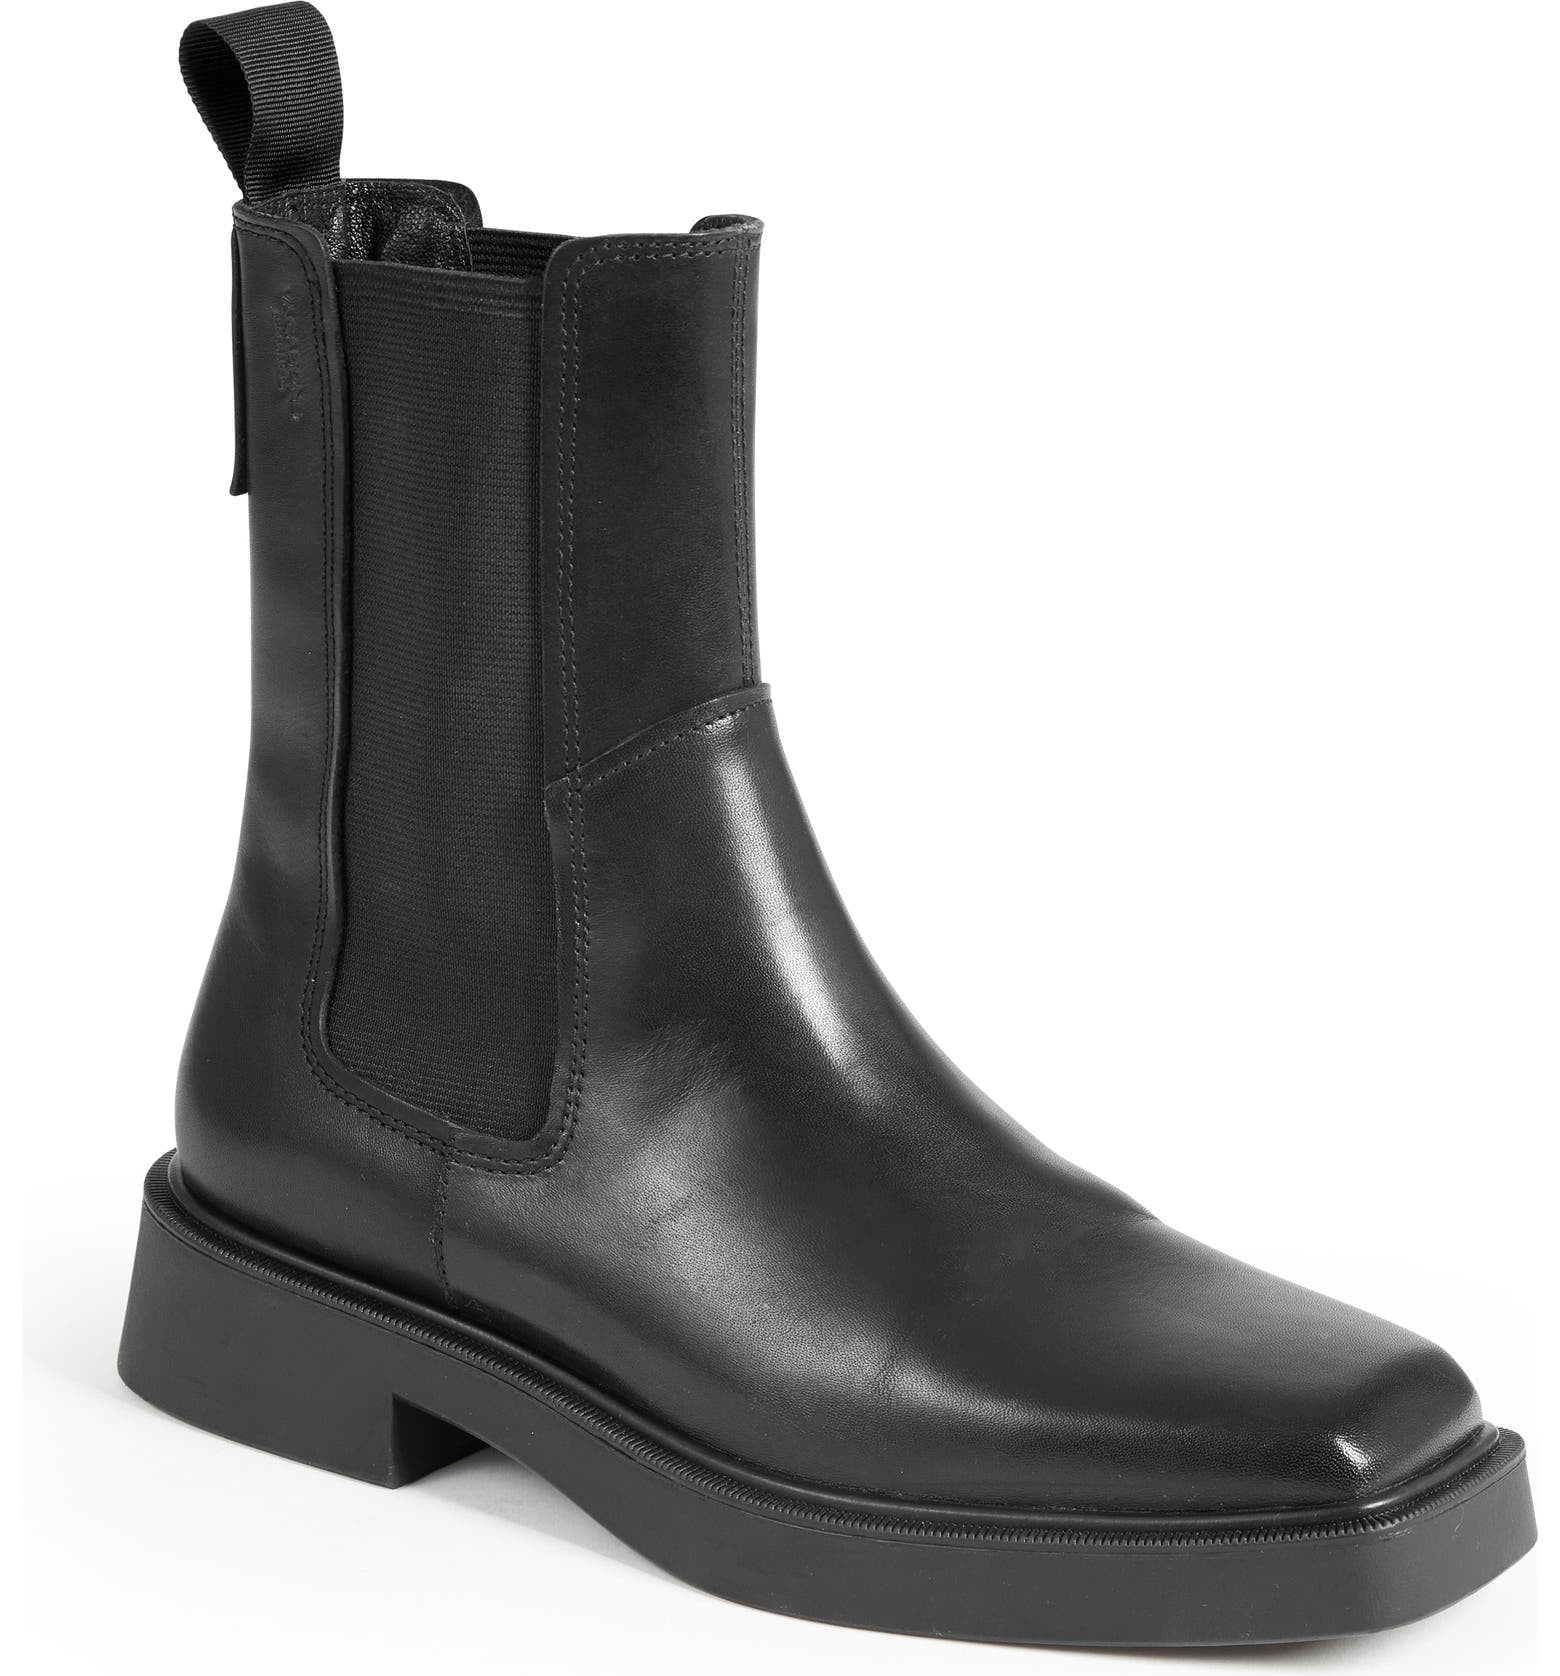 A Square-Toe Boot: Vagabond Shoemakers Jillian Chelsea Boot | 17 Cool Boots We Can't Stop Thinking About Buying This Fall | Fashion Photo 7